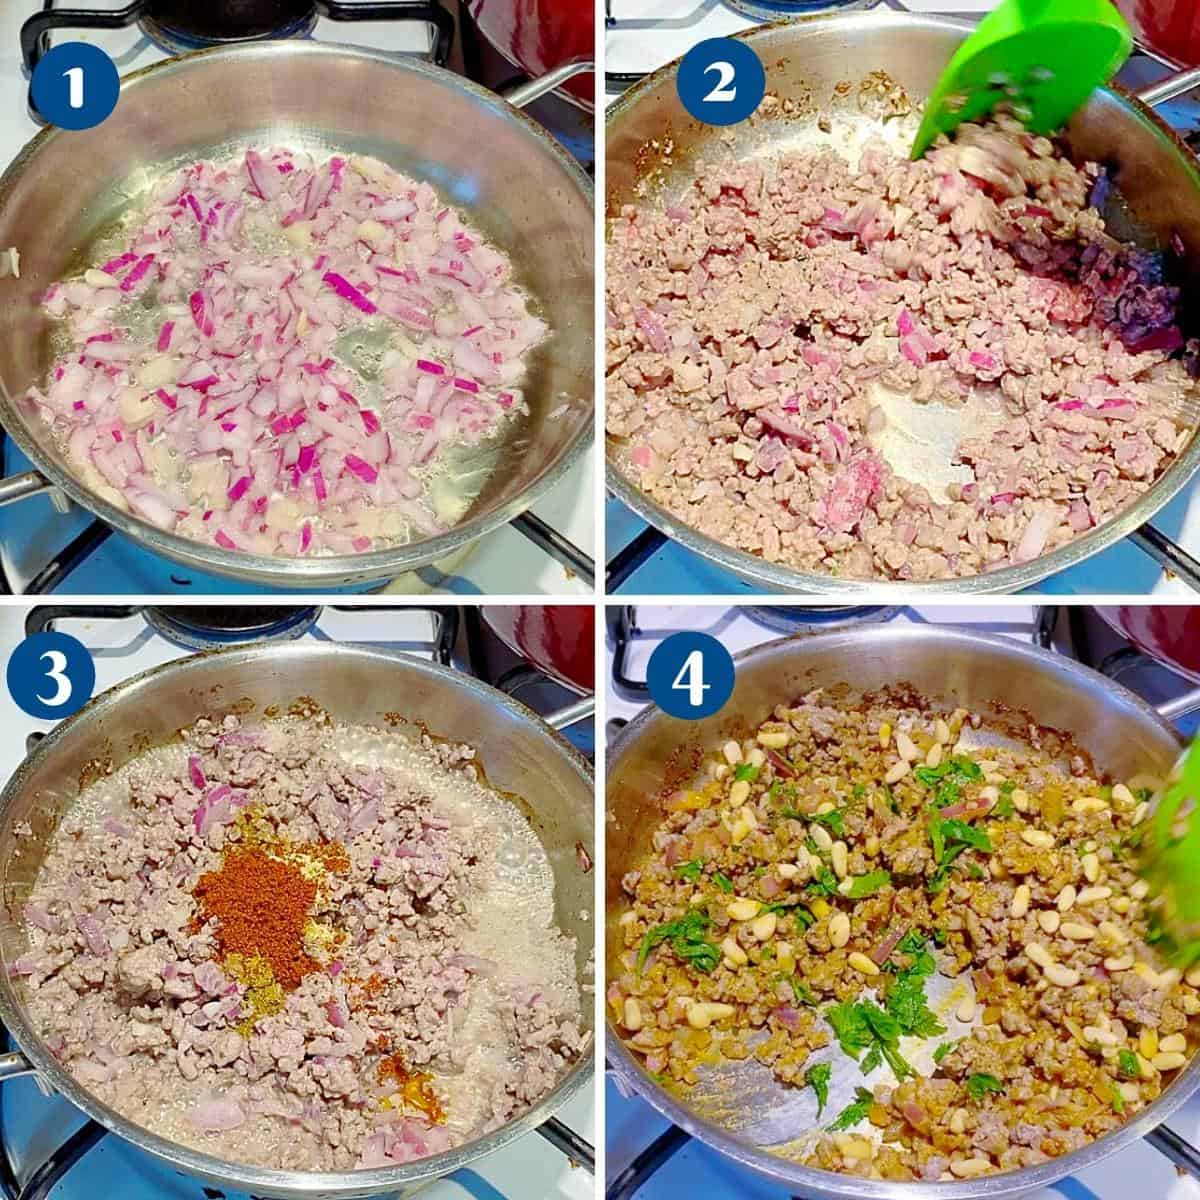 Progress pictures how to make ground meat for hummus.